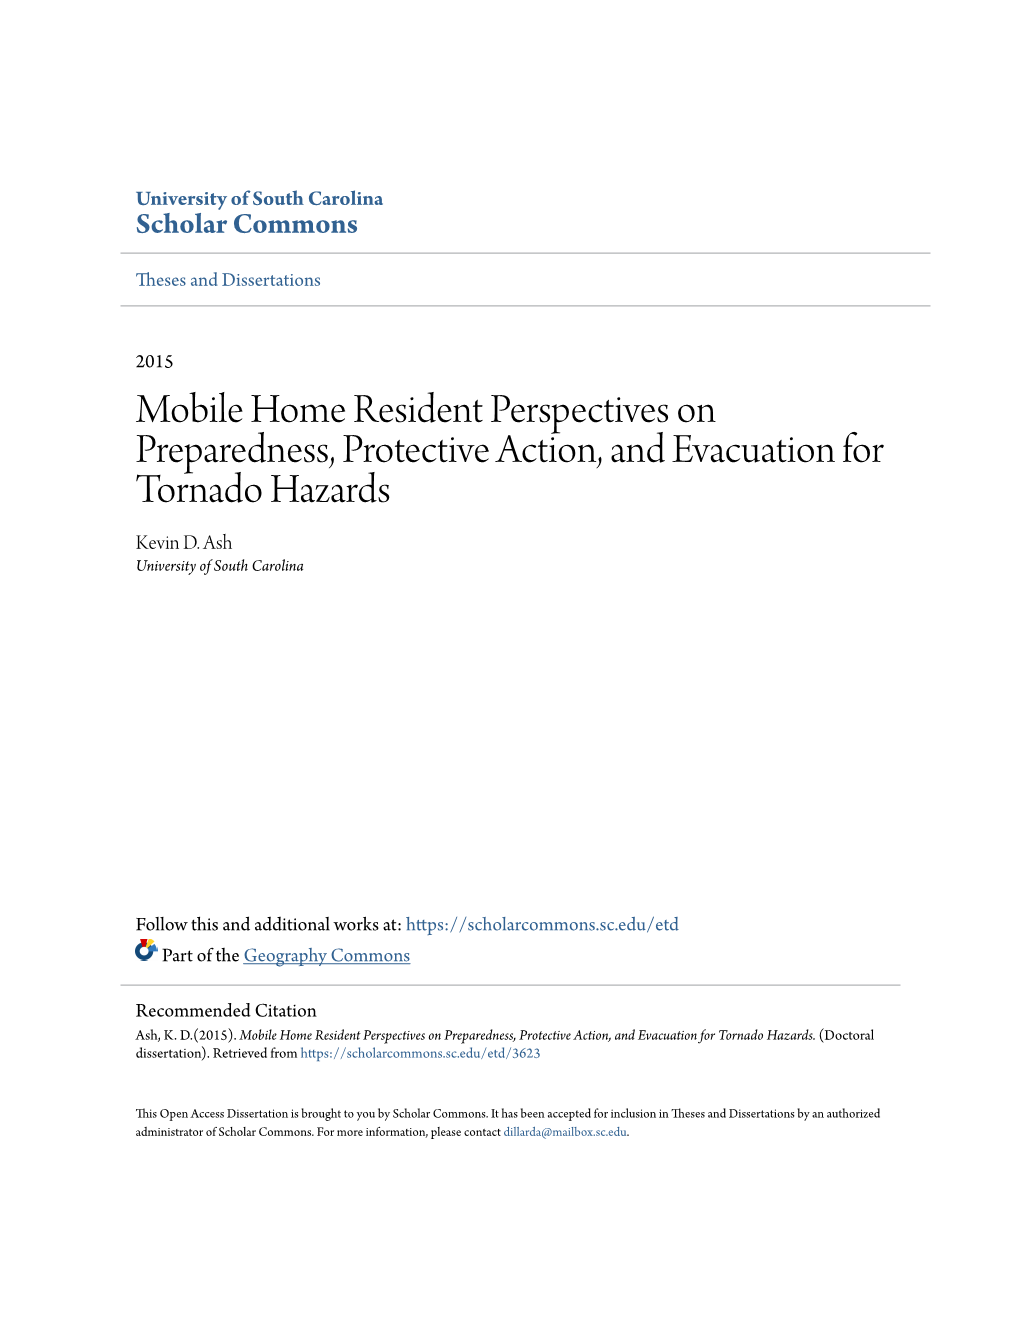 Mobile Home Resident Perspectives on Preparedness, Protective Action, and Evacuation for Tornado Hazards Kevin D